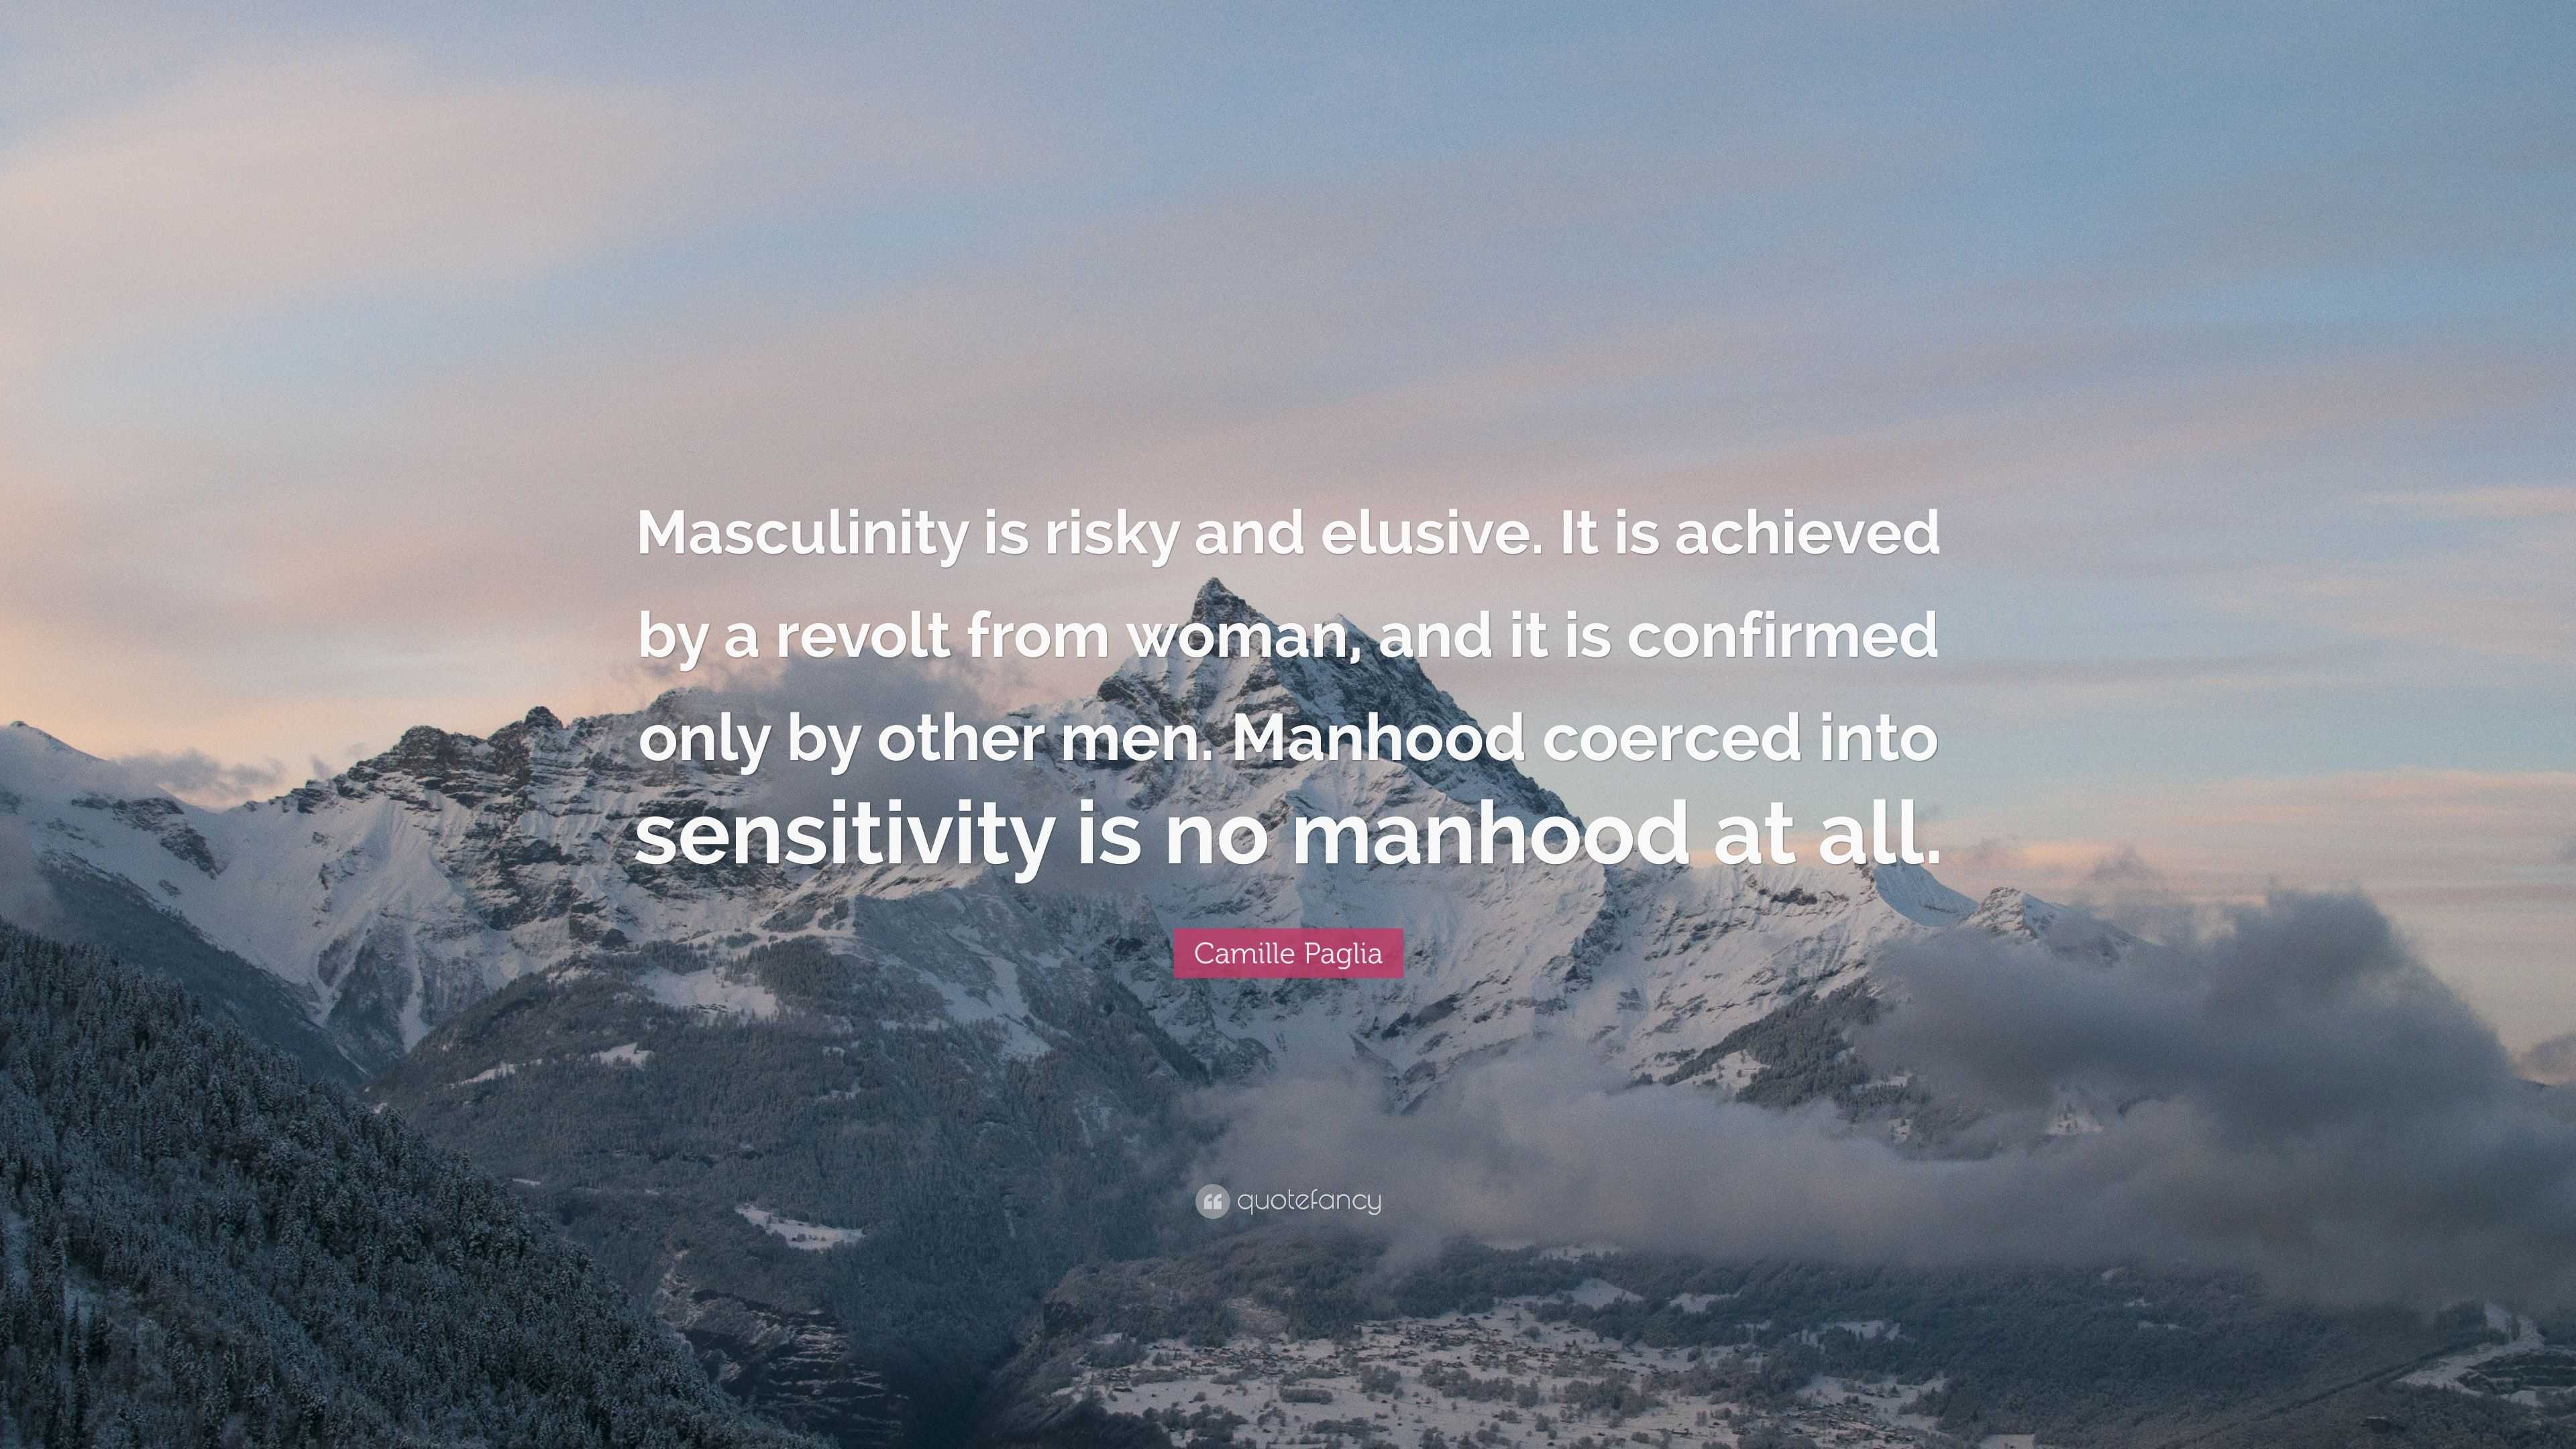 Camille Paglia Quote Masculinity Is Risky And Elusive It Is Achieved By A Revolt From Woman And It Is Confirmed Only By Other Men Manhood